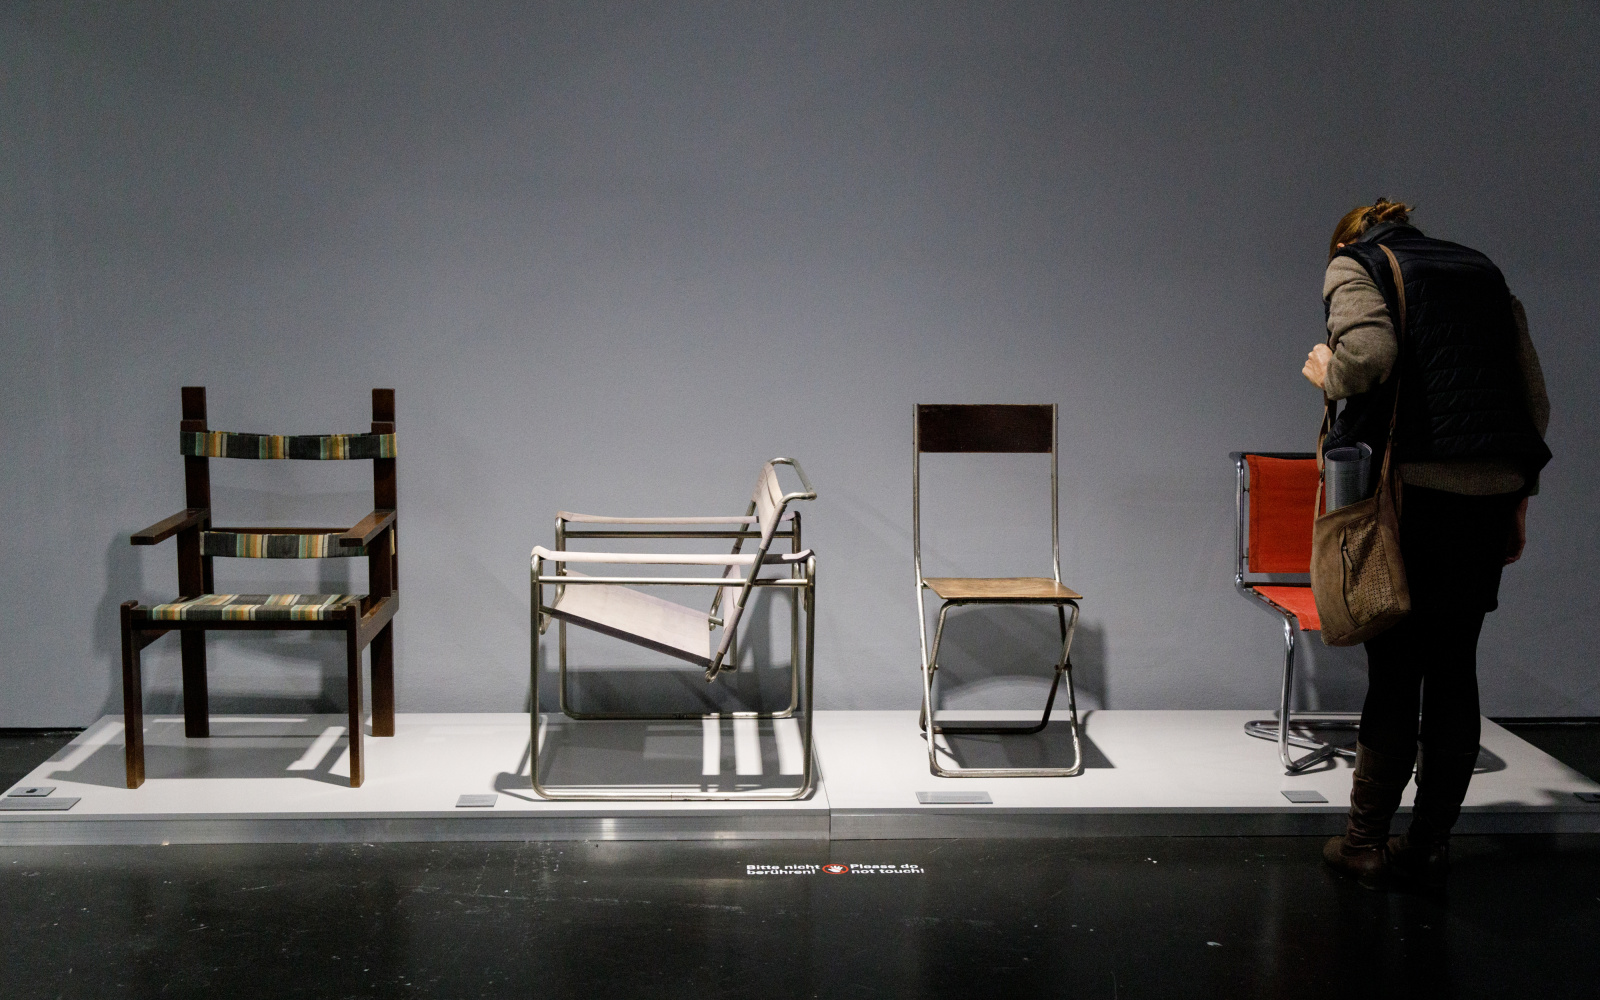 Exhibition view »The Whole World a Bauhaus», Woman watching chairs of the Bauhaus-Collection